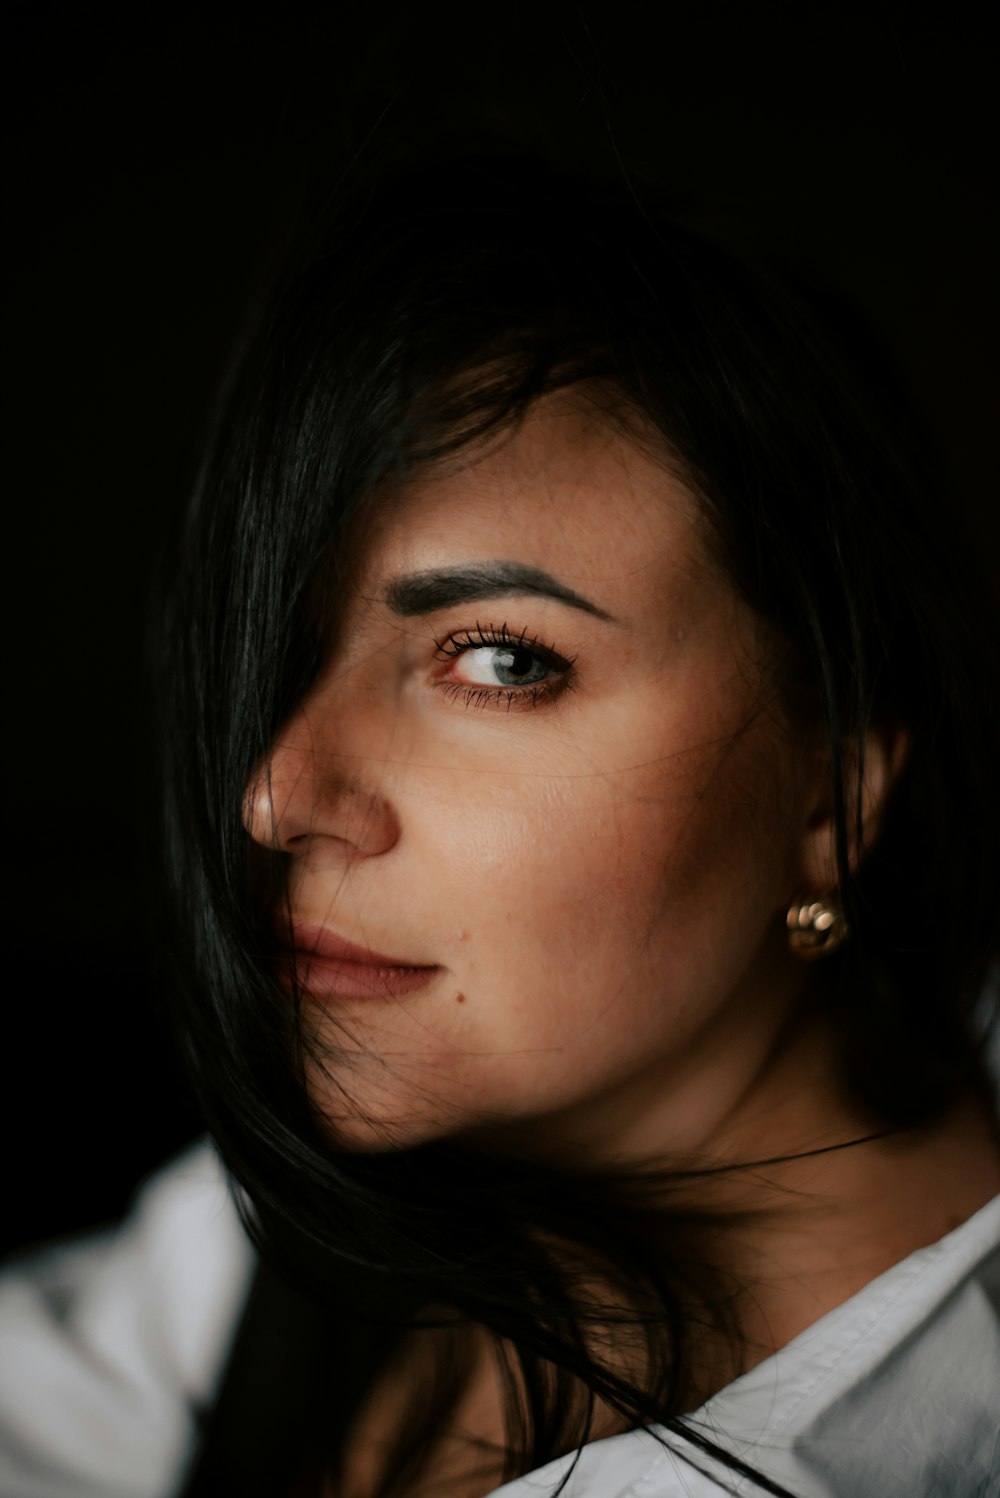 a close up of a person wearing a white shirt